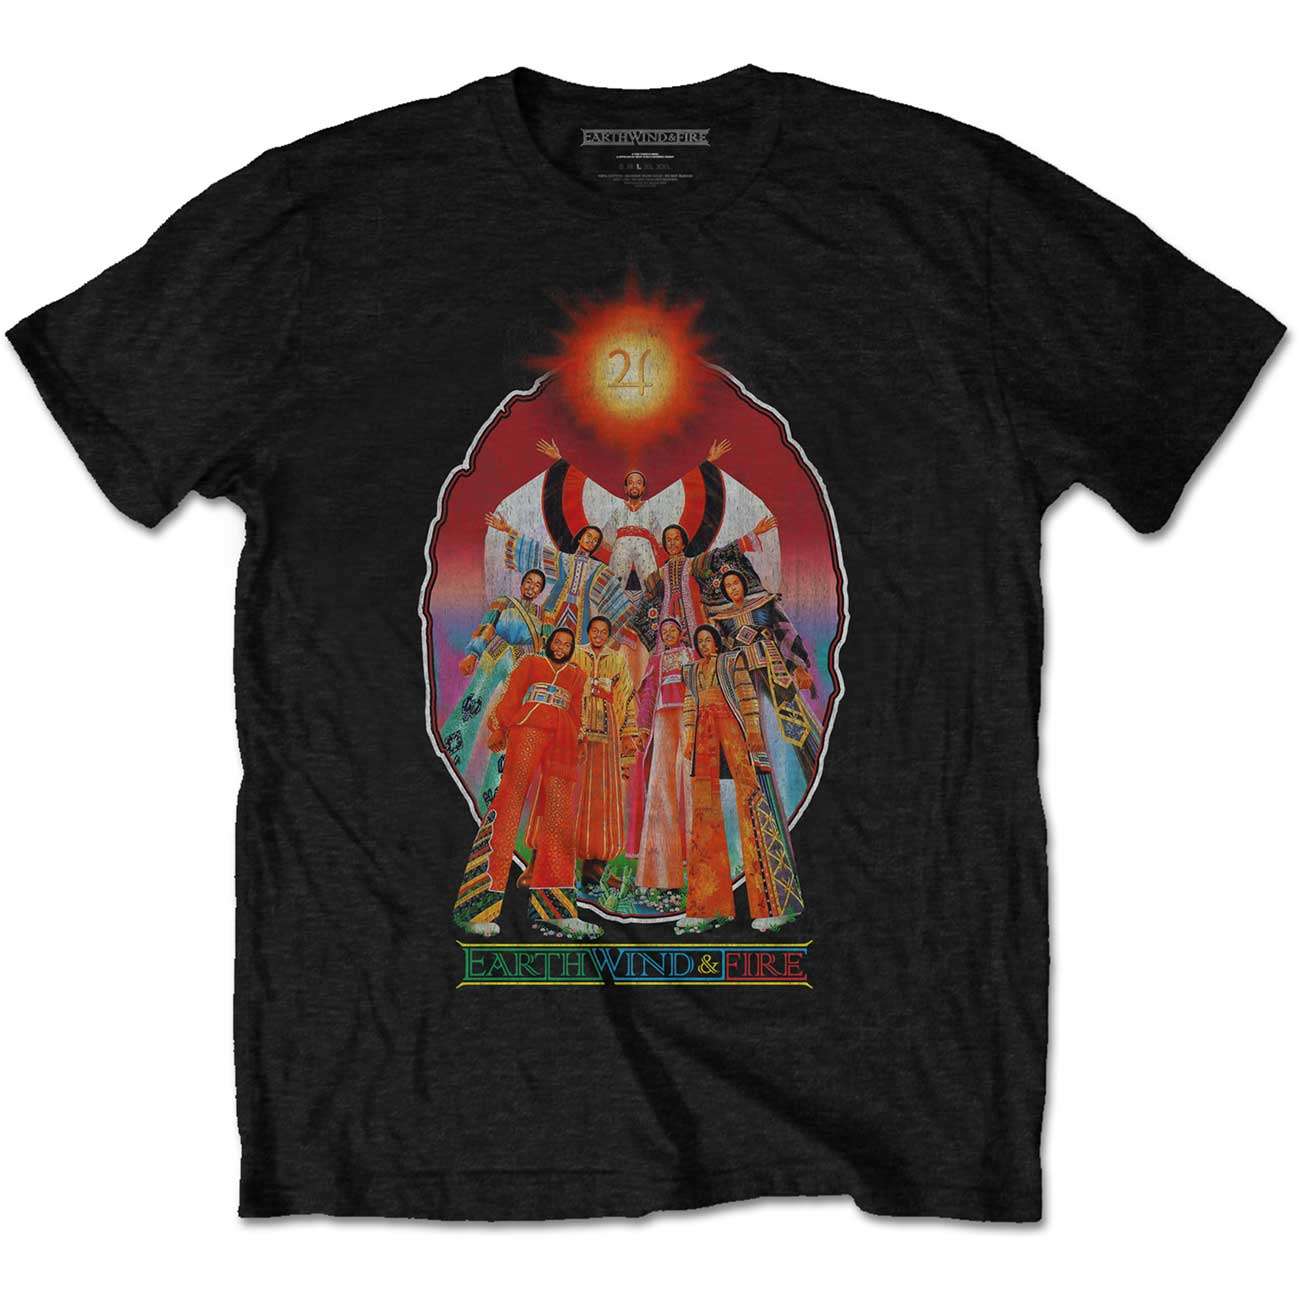 earth wind and fire shirt ireland